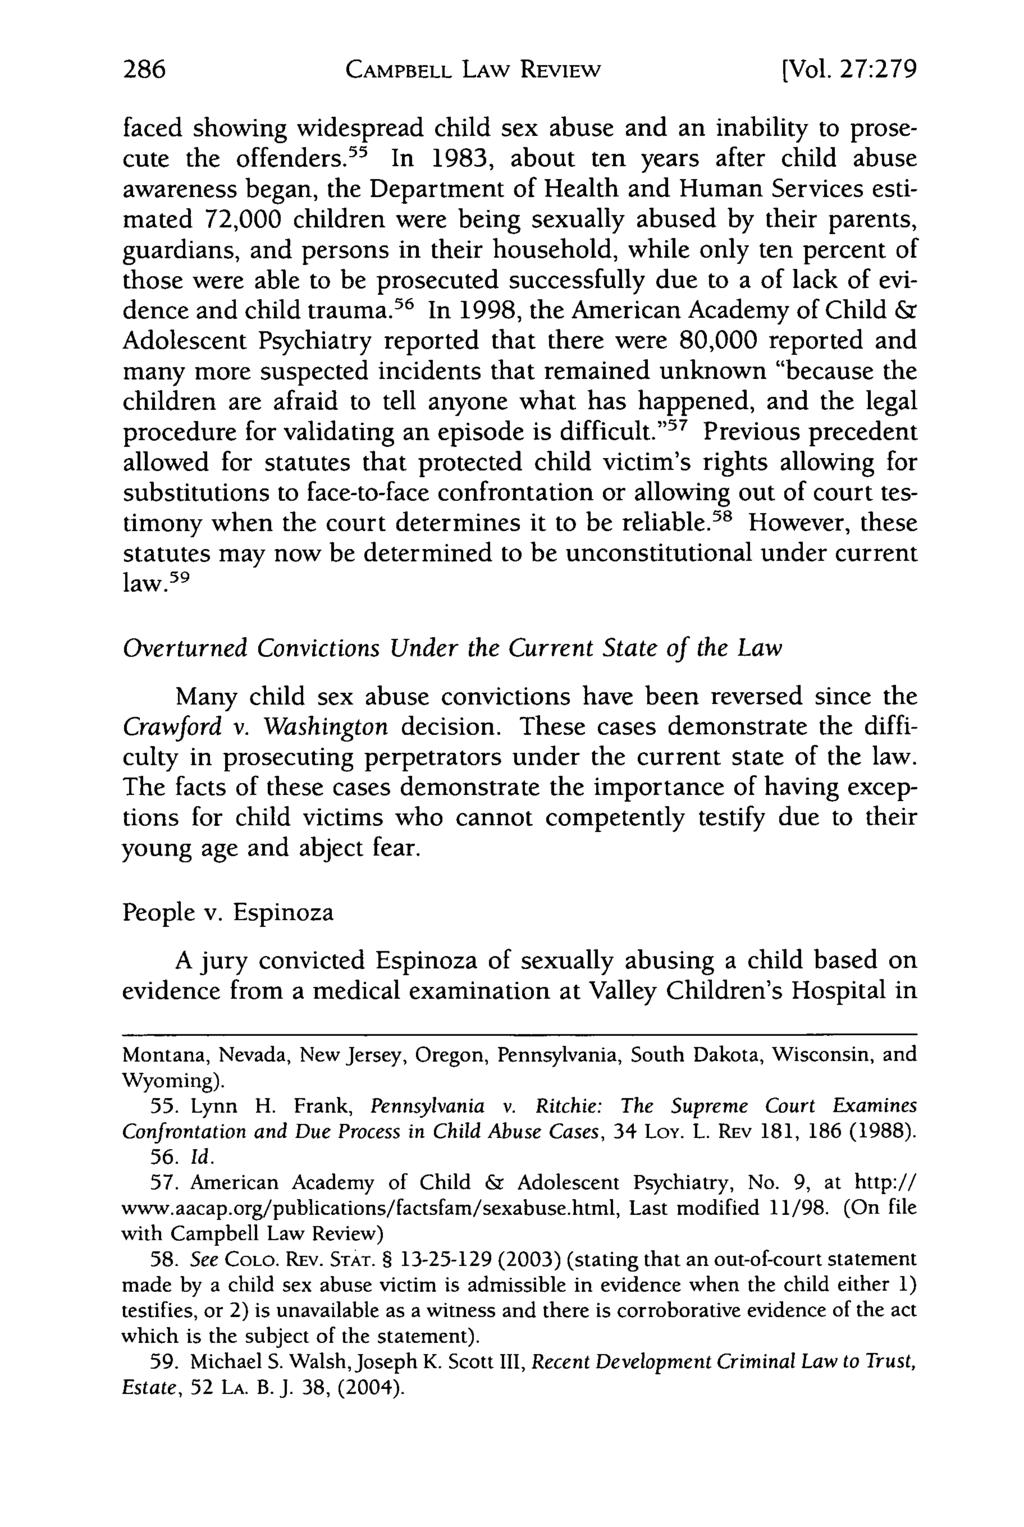 286 Campbell Law Review, Vol. 27, Iss. 2 [2005], Art. 5 CAMPBELL LAW REVIEW [Vol. 27:279 faced showing widespread child sex abuse and an inability to prosecute the offenders.